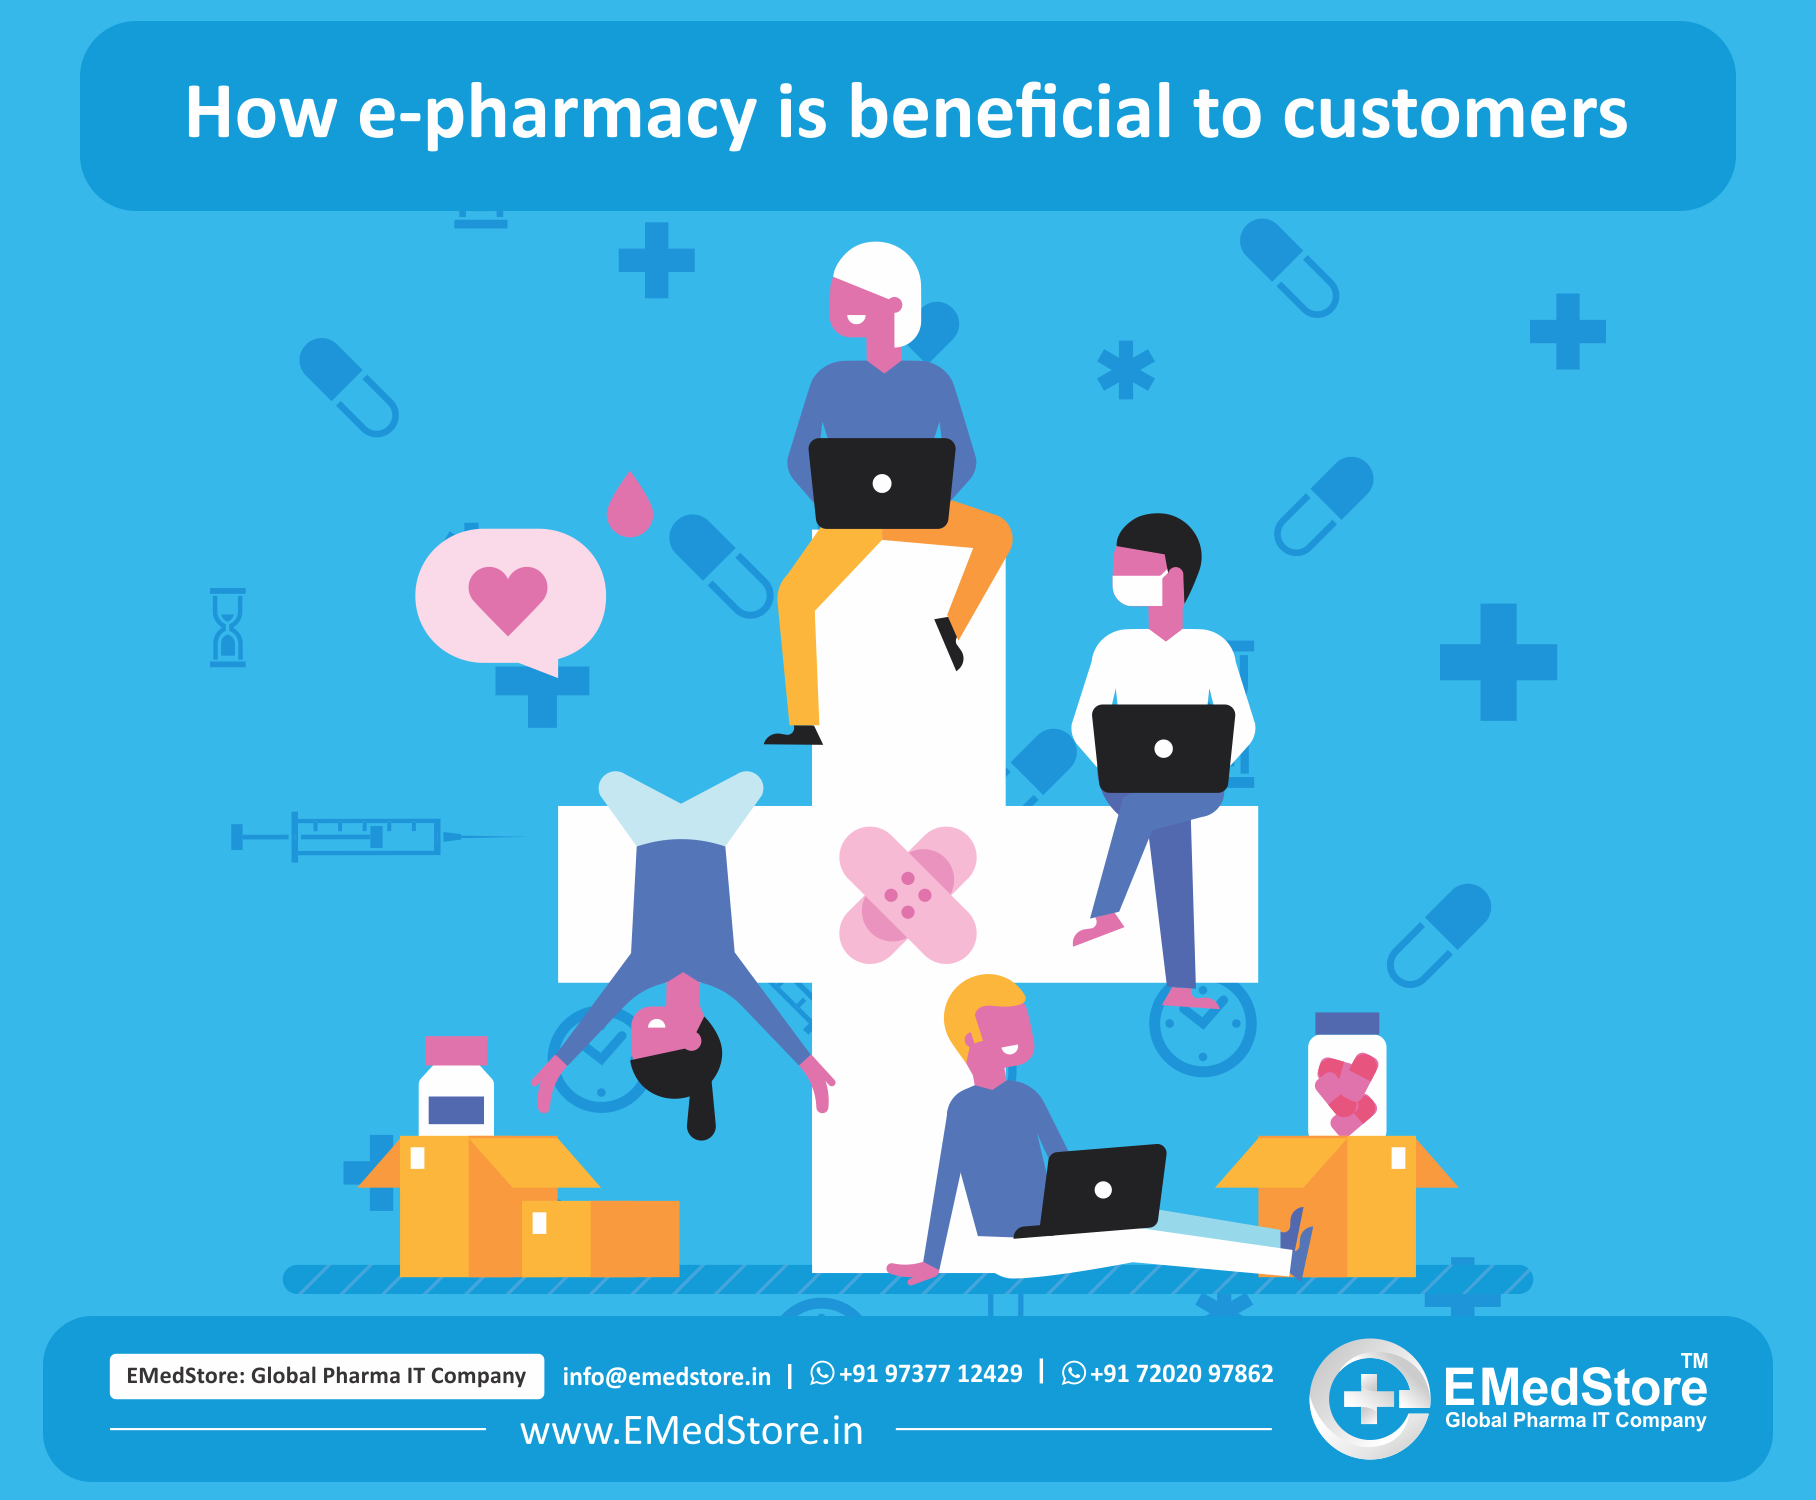 How e-pharmacy is beneficial to customers | EMedStore Blog